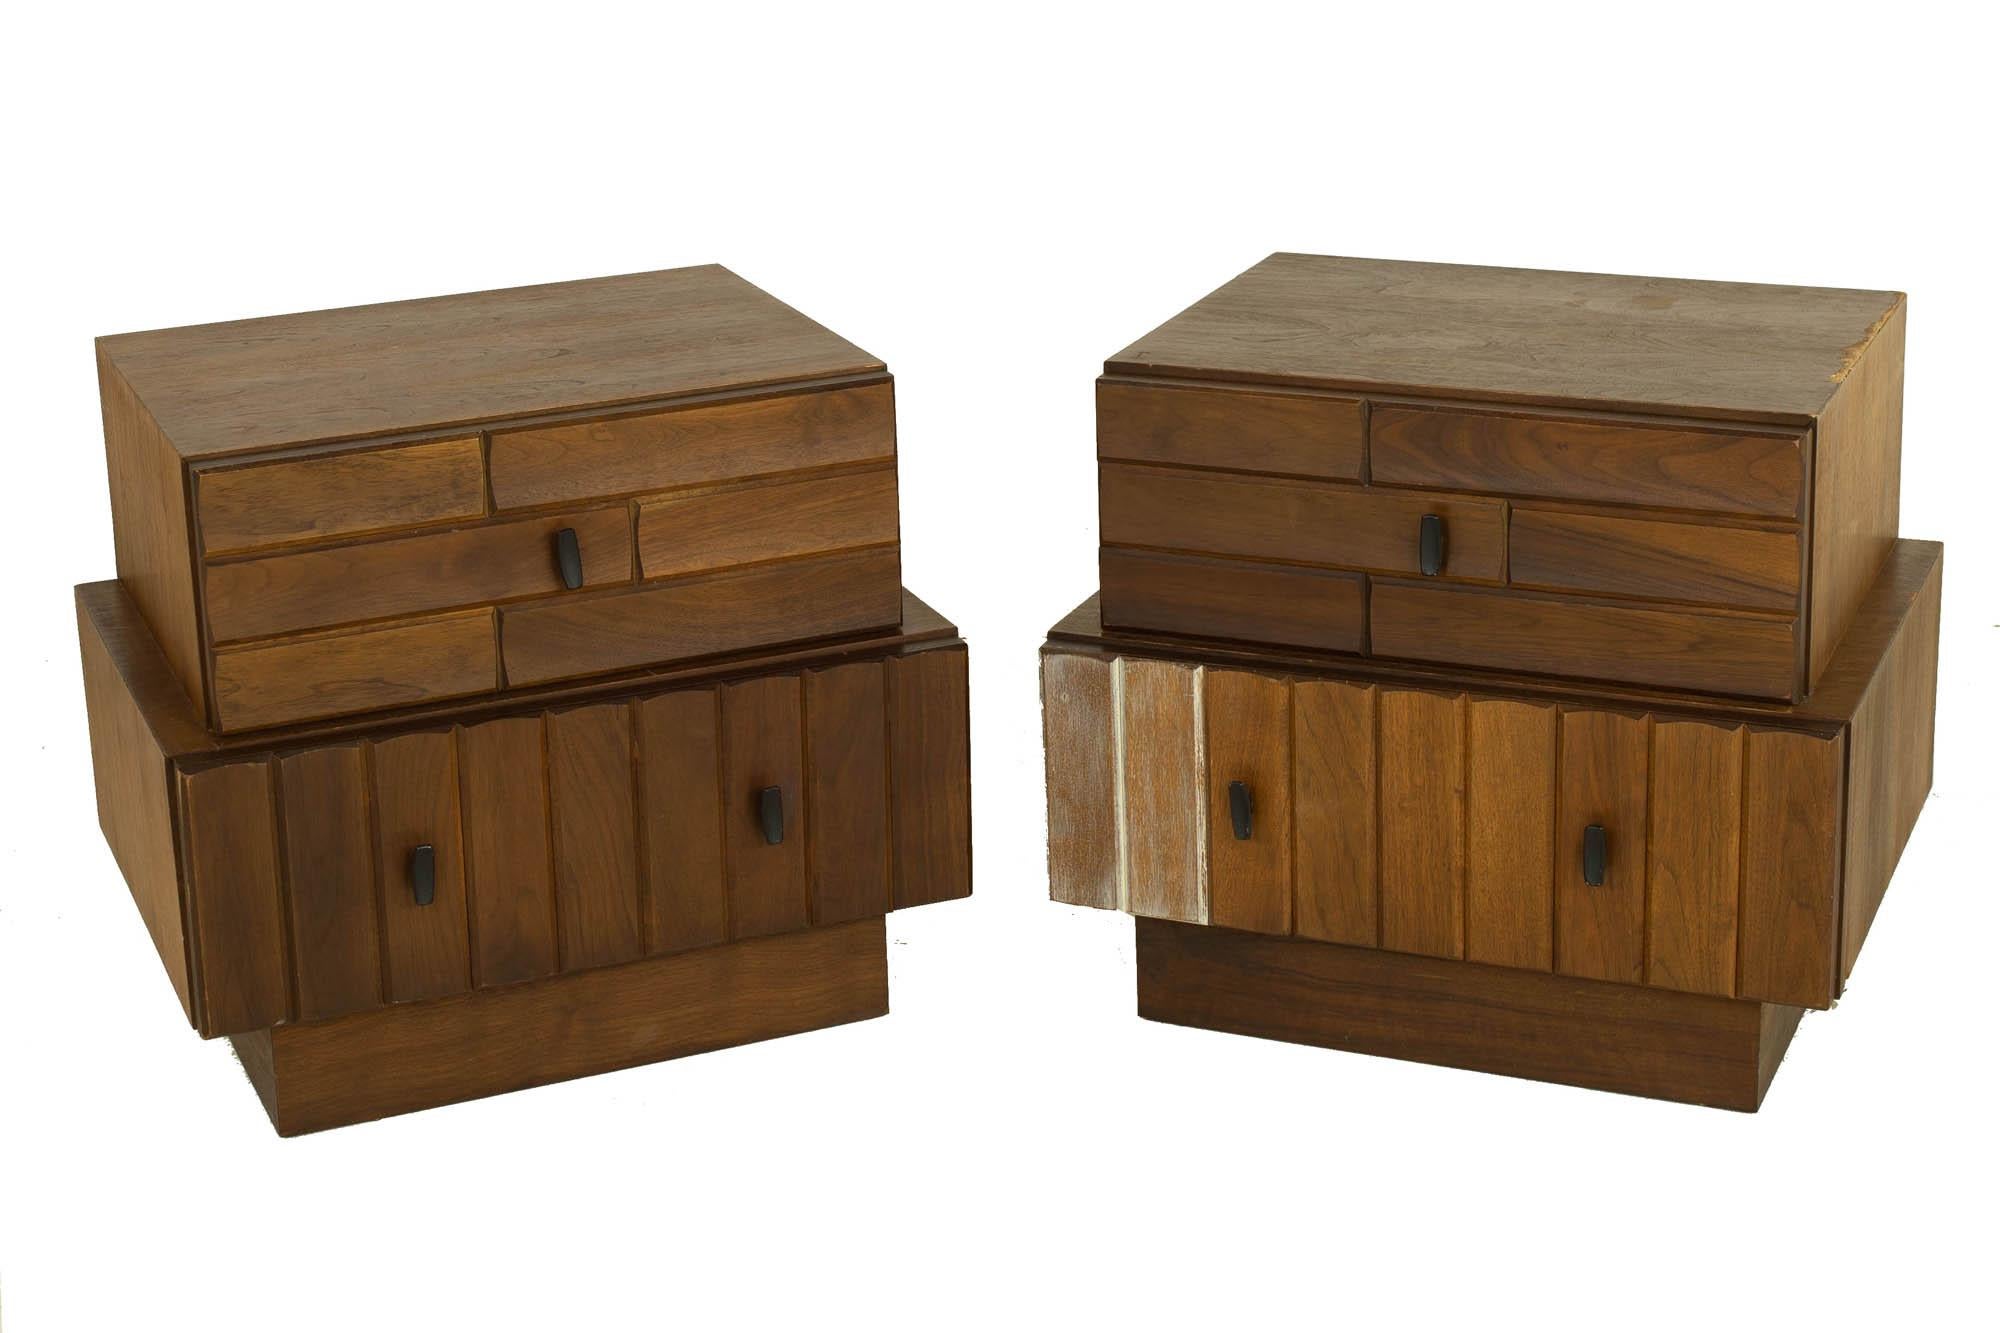 Mid century canadian Brutalist walnut nightstands - pair

These nightstands measure: 25 wide x 19 deep x 22 inches high

?All pieces of furniture can be had in what we call restored vintage condition. That means the piece is restored upon